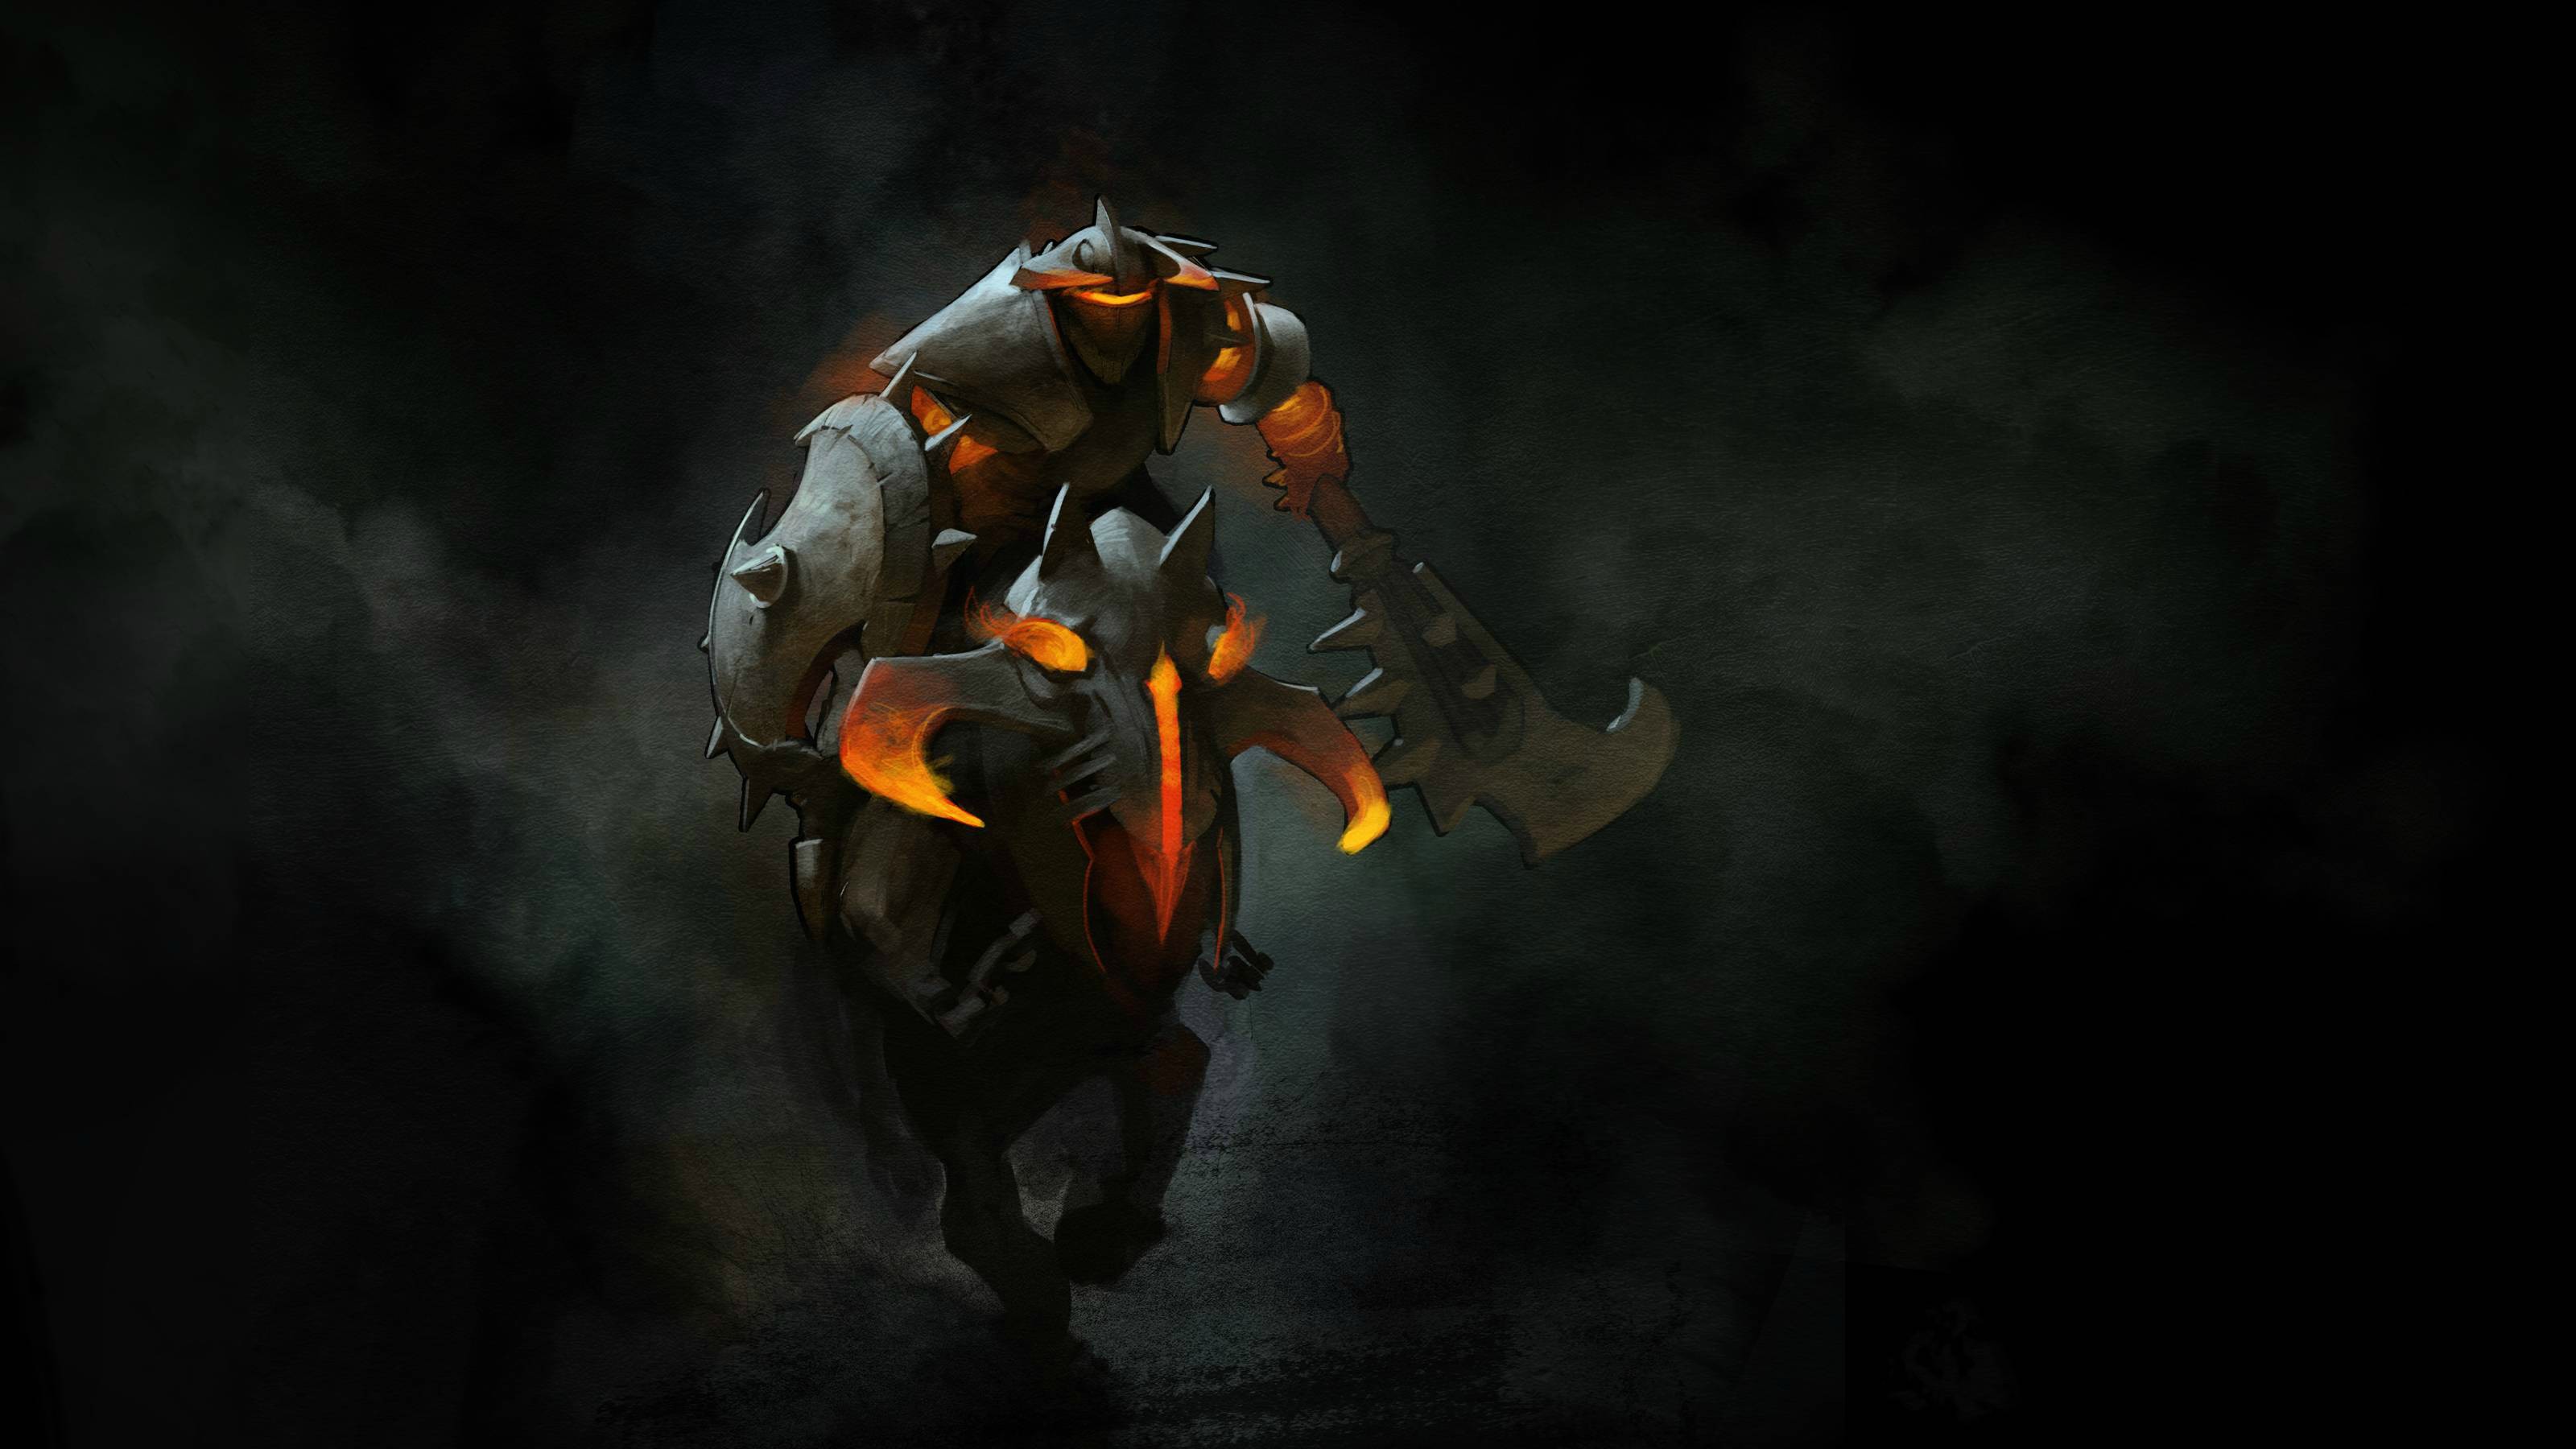 About dota character фото 79